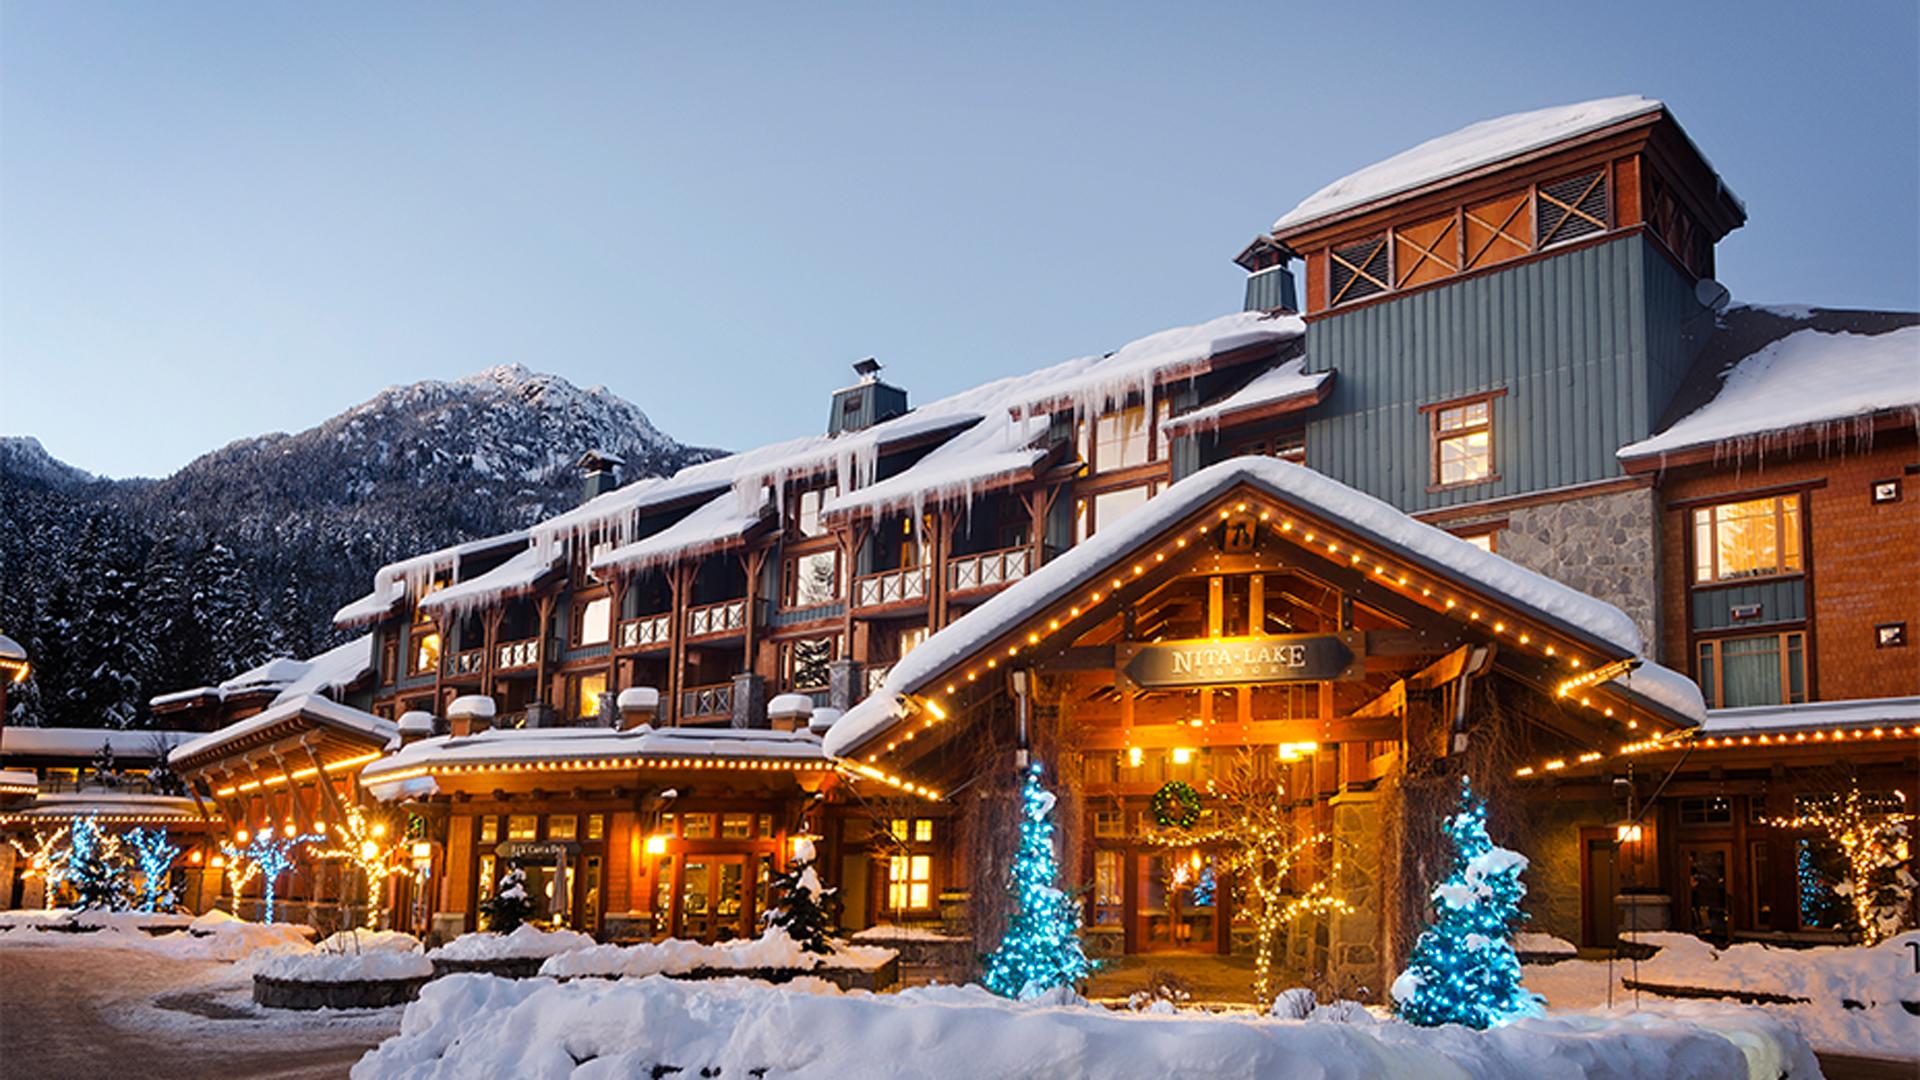 Best things to do in Whistler | Nita Lake Lodge at Christmas time